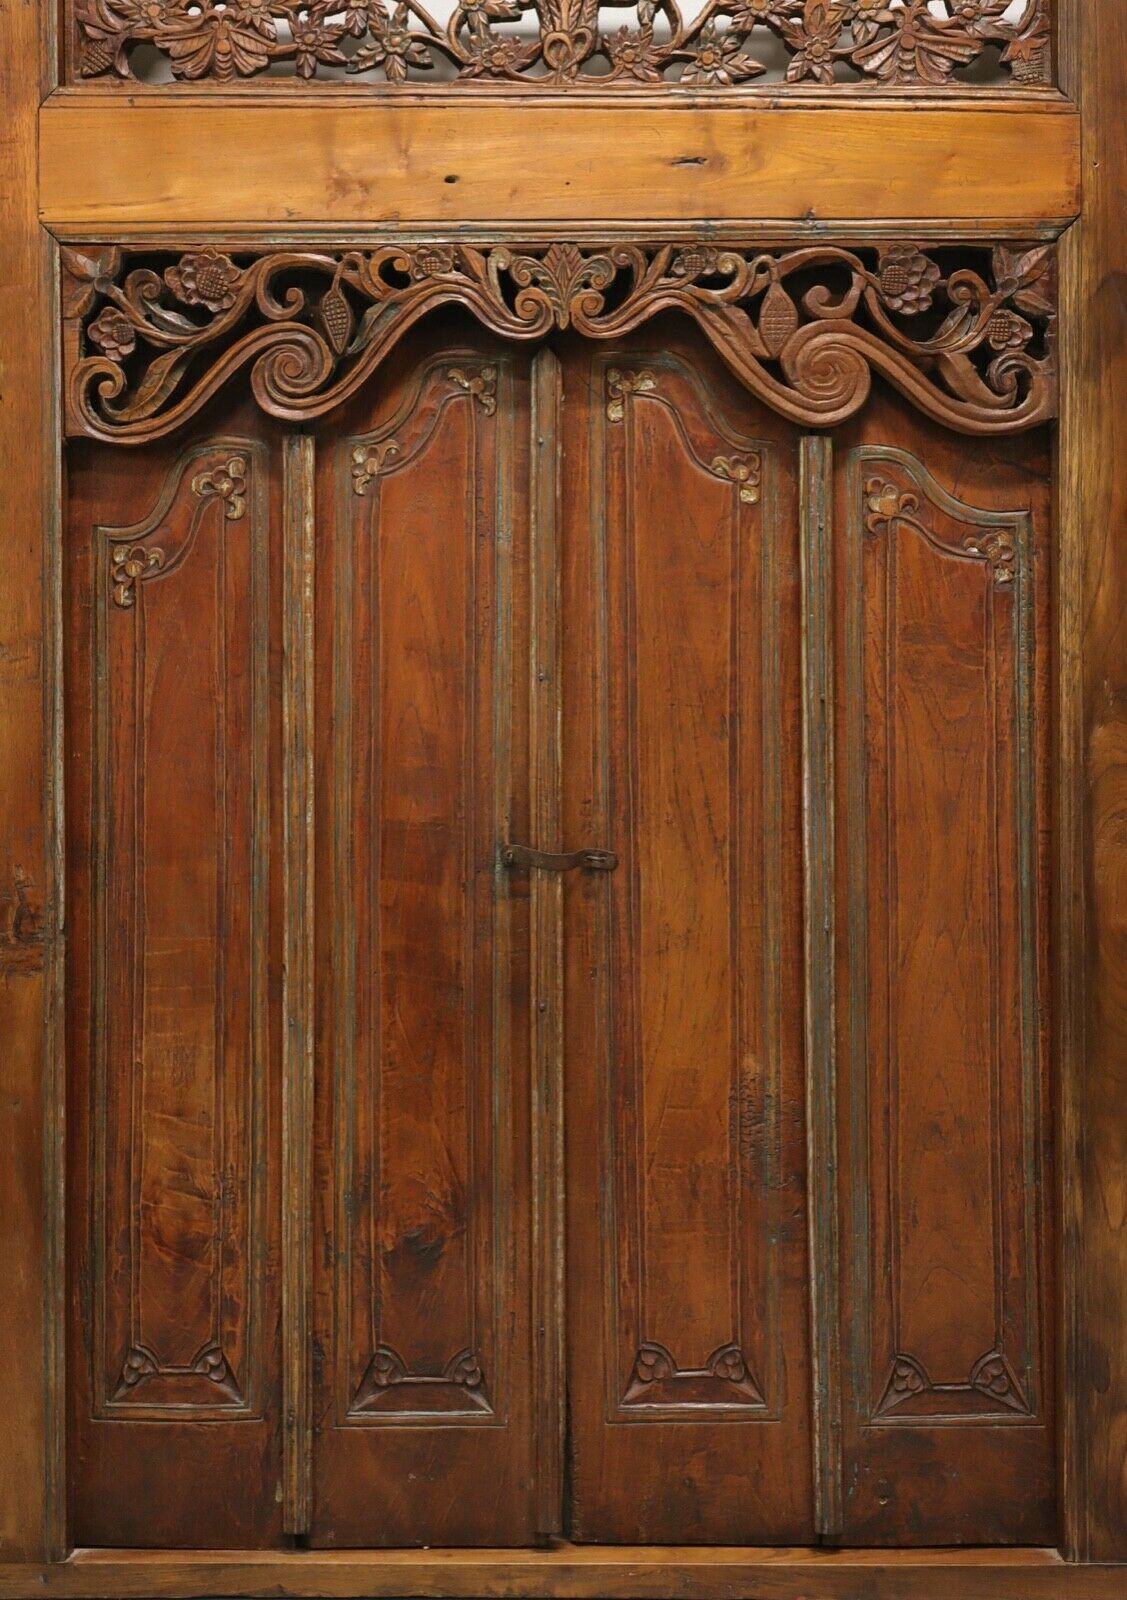 19th Century Antique Thai Carved Panel with Doors - Use as Headboard, Room Divider, Wall Art